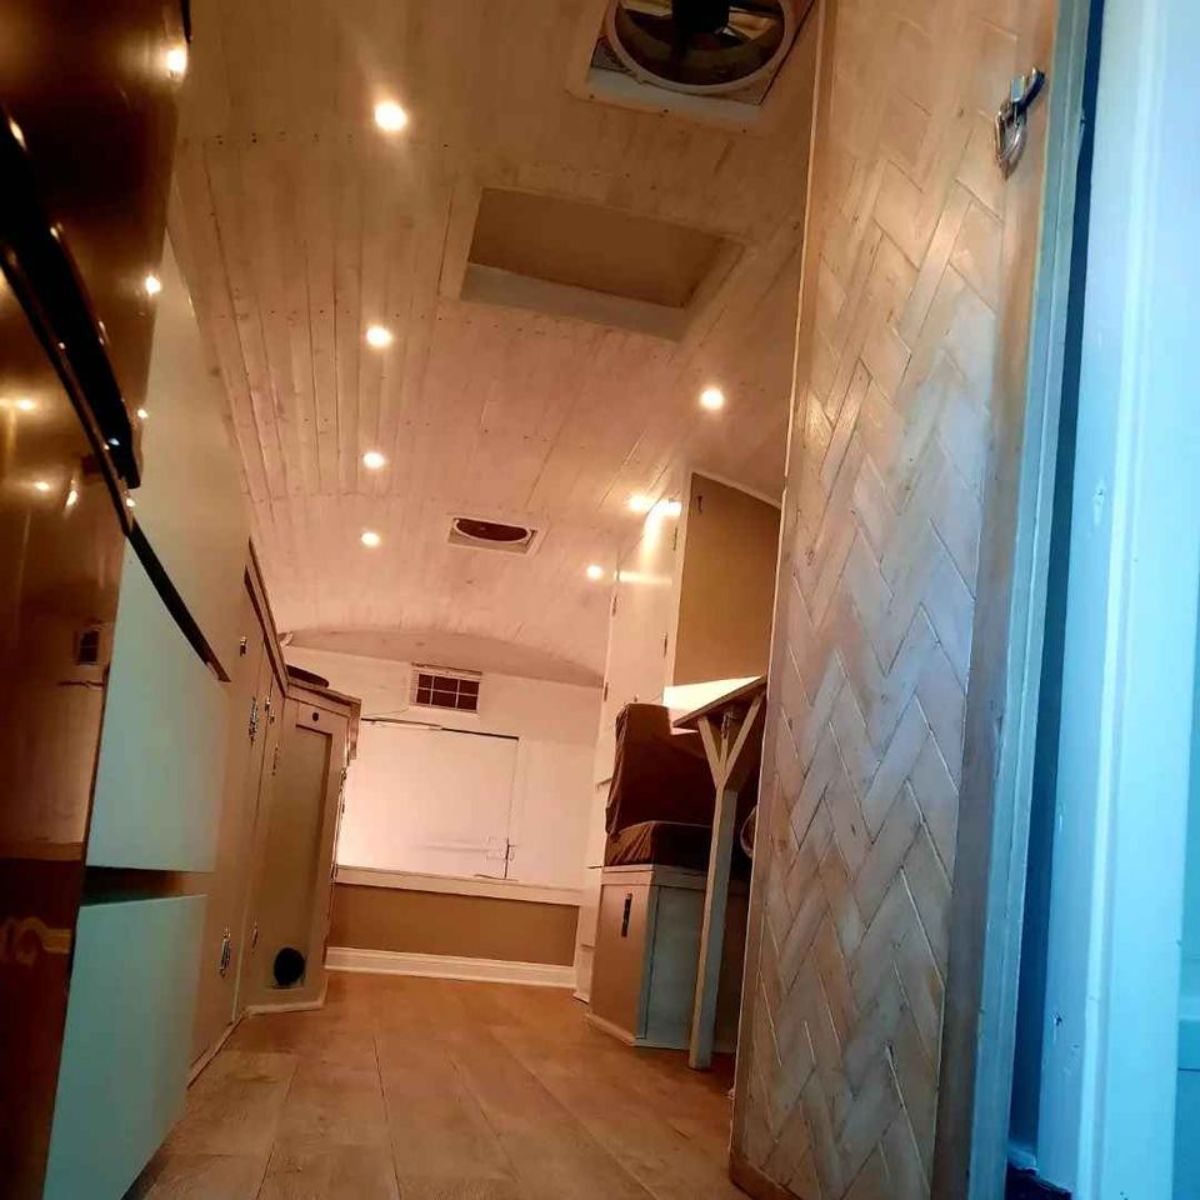 Wooden flooring and led rights are installed all over the converted tiny home